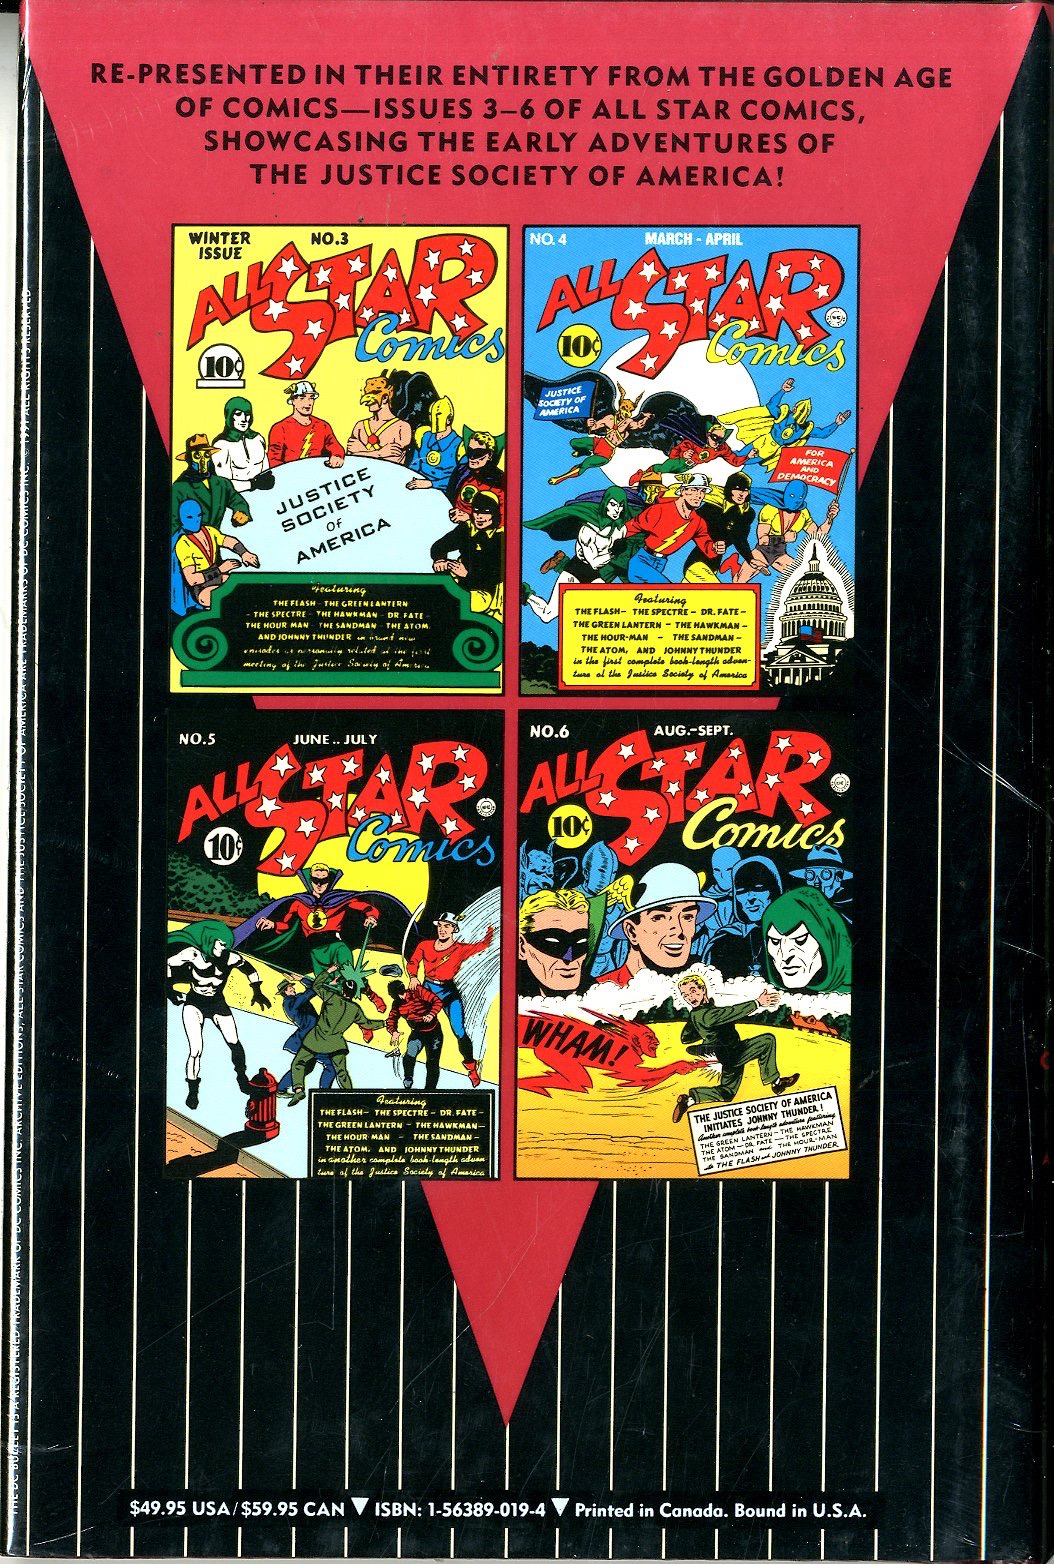 Archive Editions All Star Comics - 11242